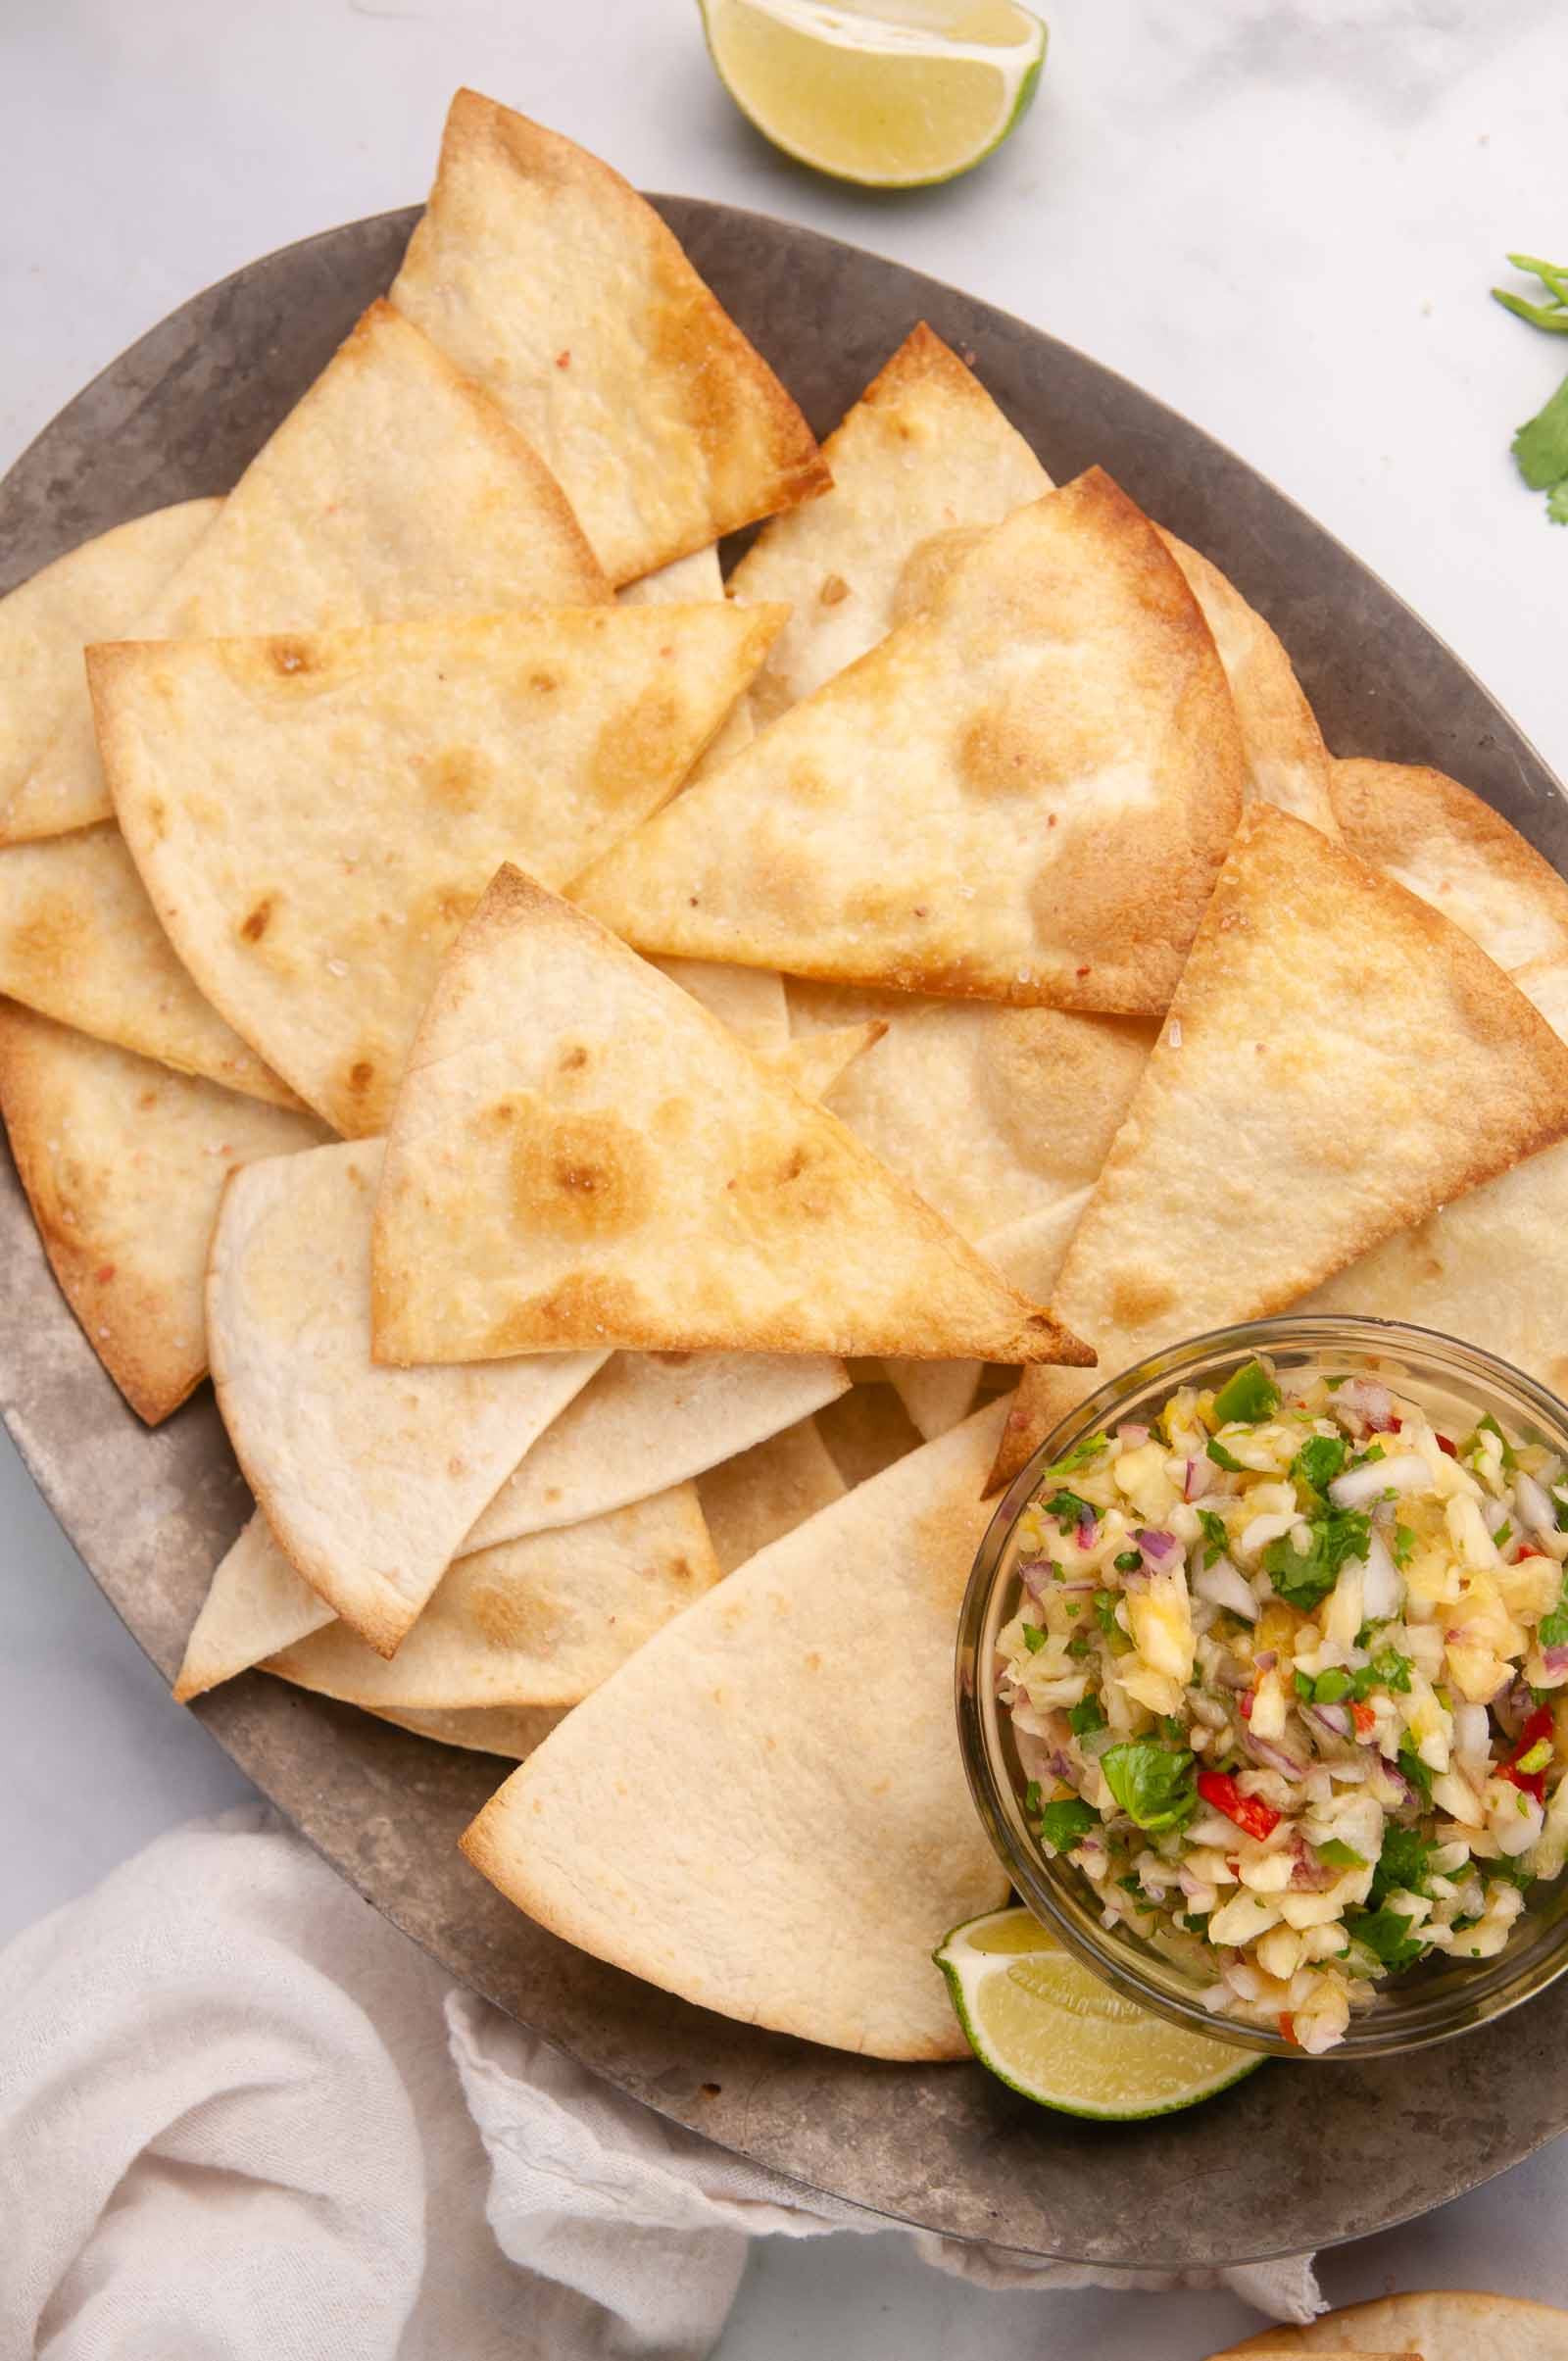 https://www.seasonedsprinkles.com/wp-content/uploads/2022/01/How-to-Make-Tortilla-Chips-in-the-Air-Fryer-and-Oven-16.jpg